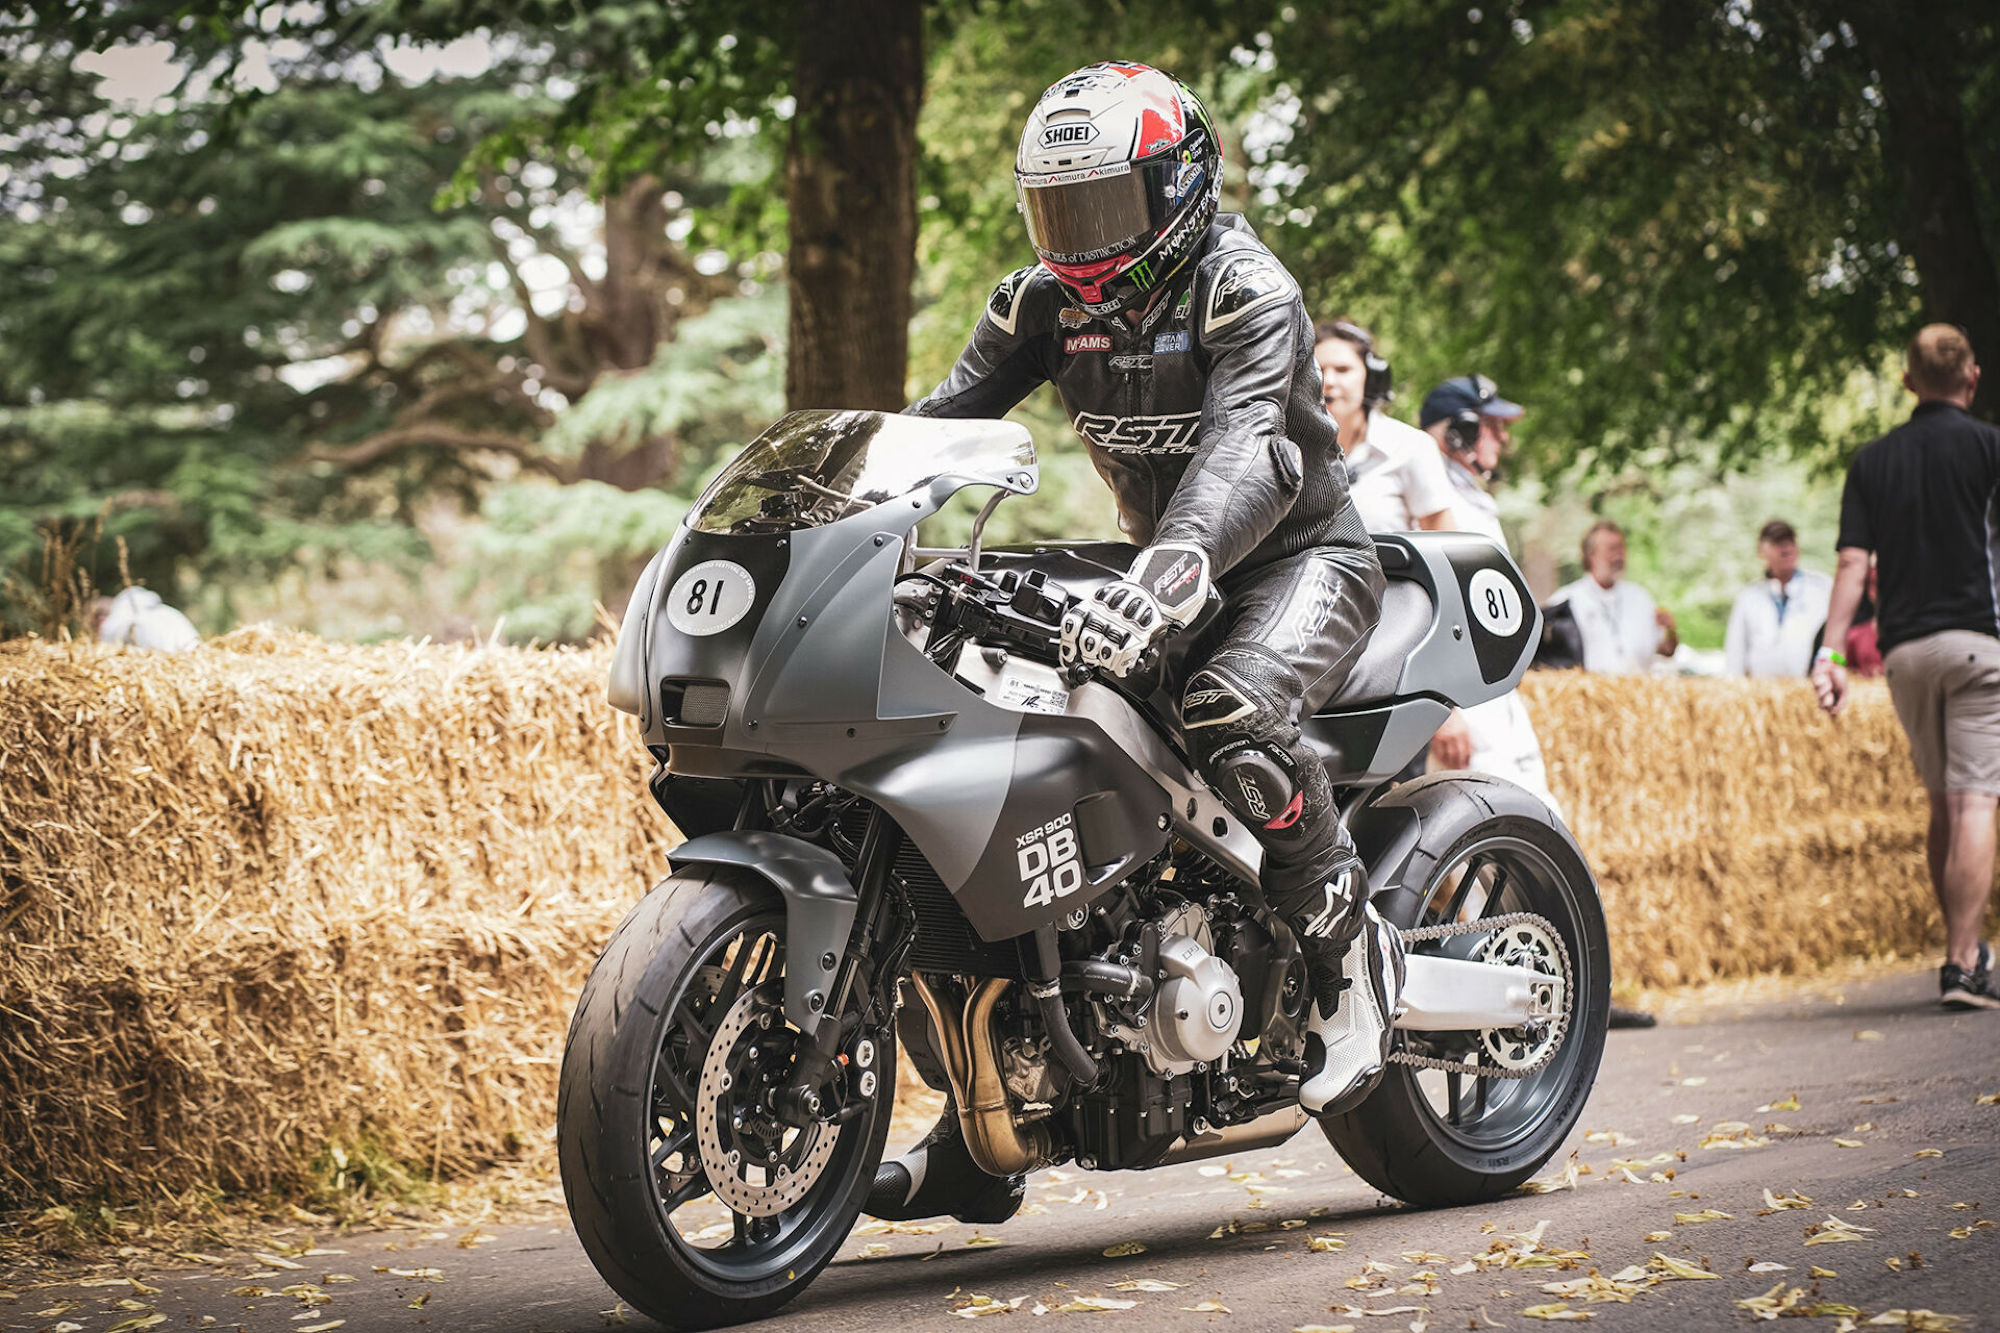 Yamaha's all-new XSR900 DB40, debuted at this year's Goodwood Festival of Speed. Media sourced from Yamaha's press release on Roadracing World.